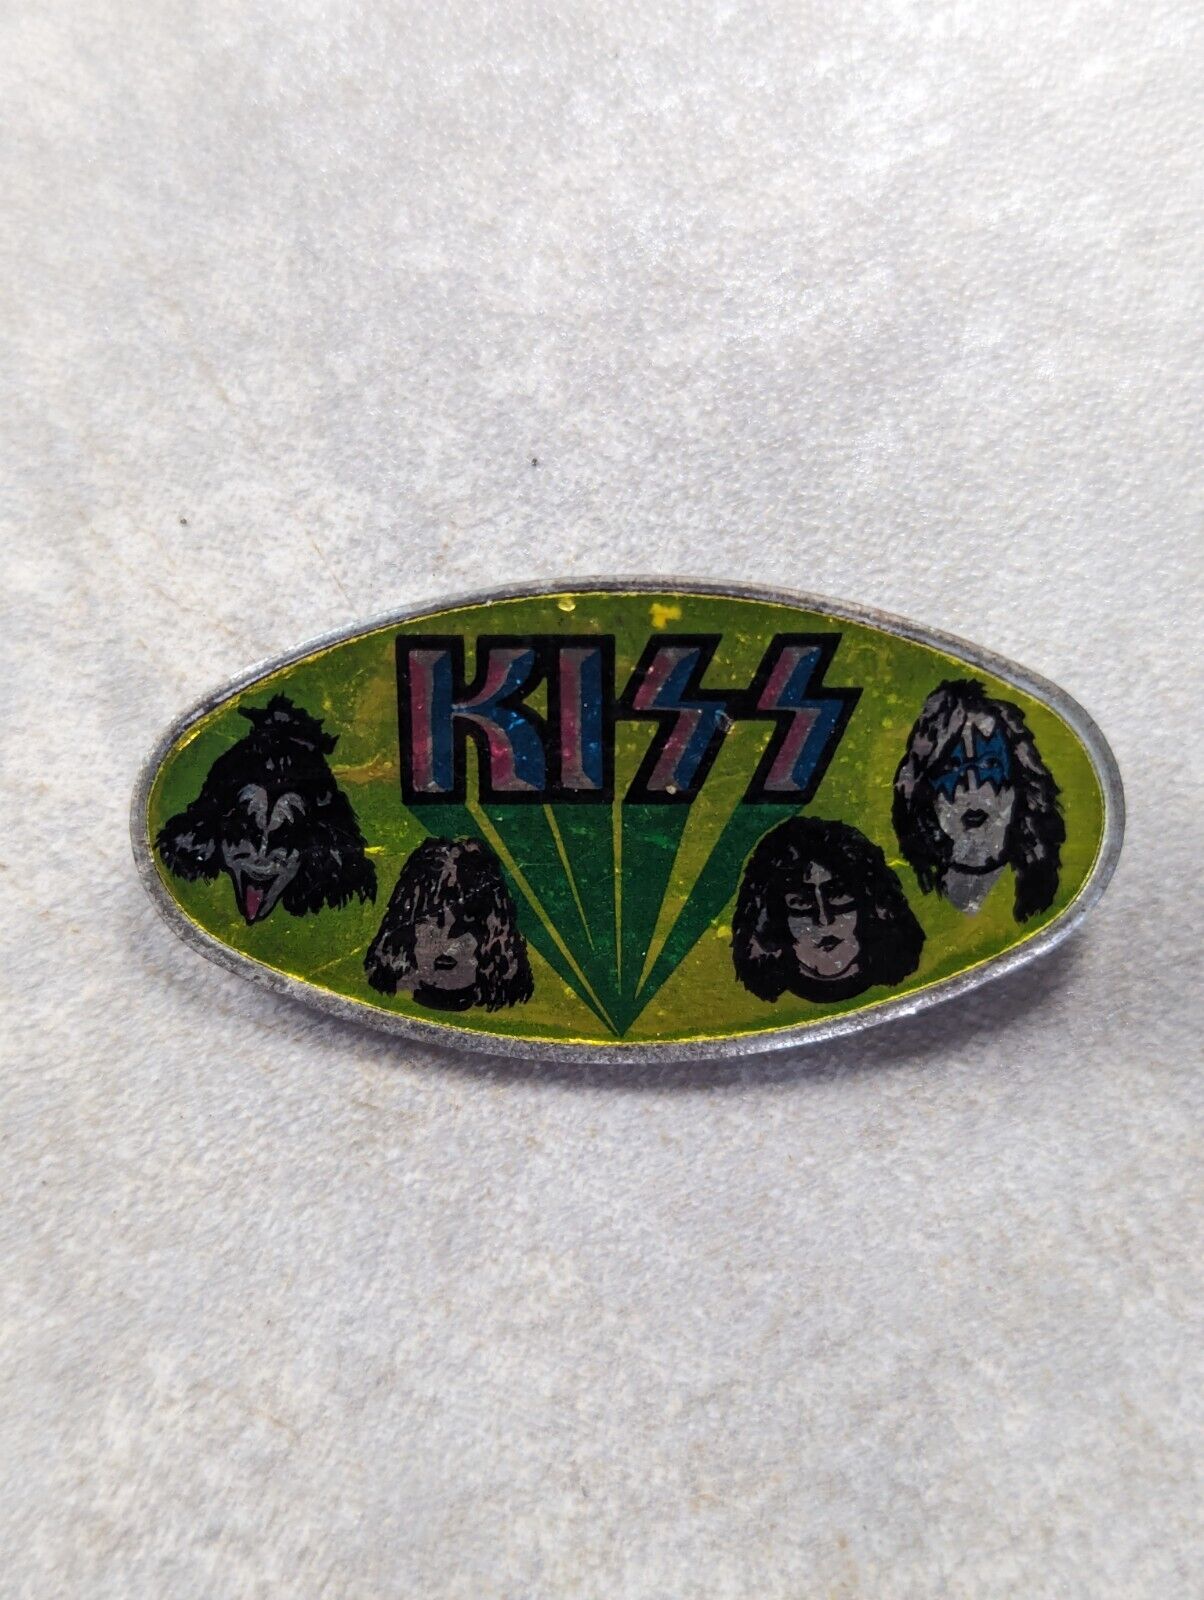 Vintage 80s KISS PIN BADGE Purchased Around 1986